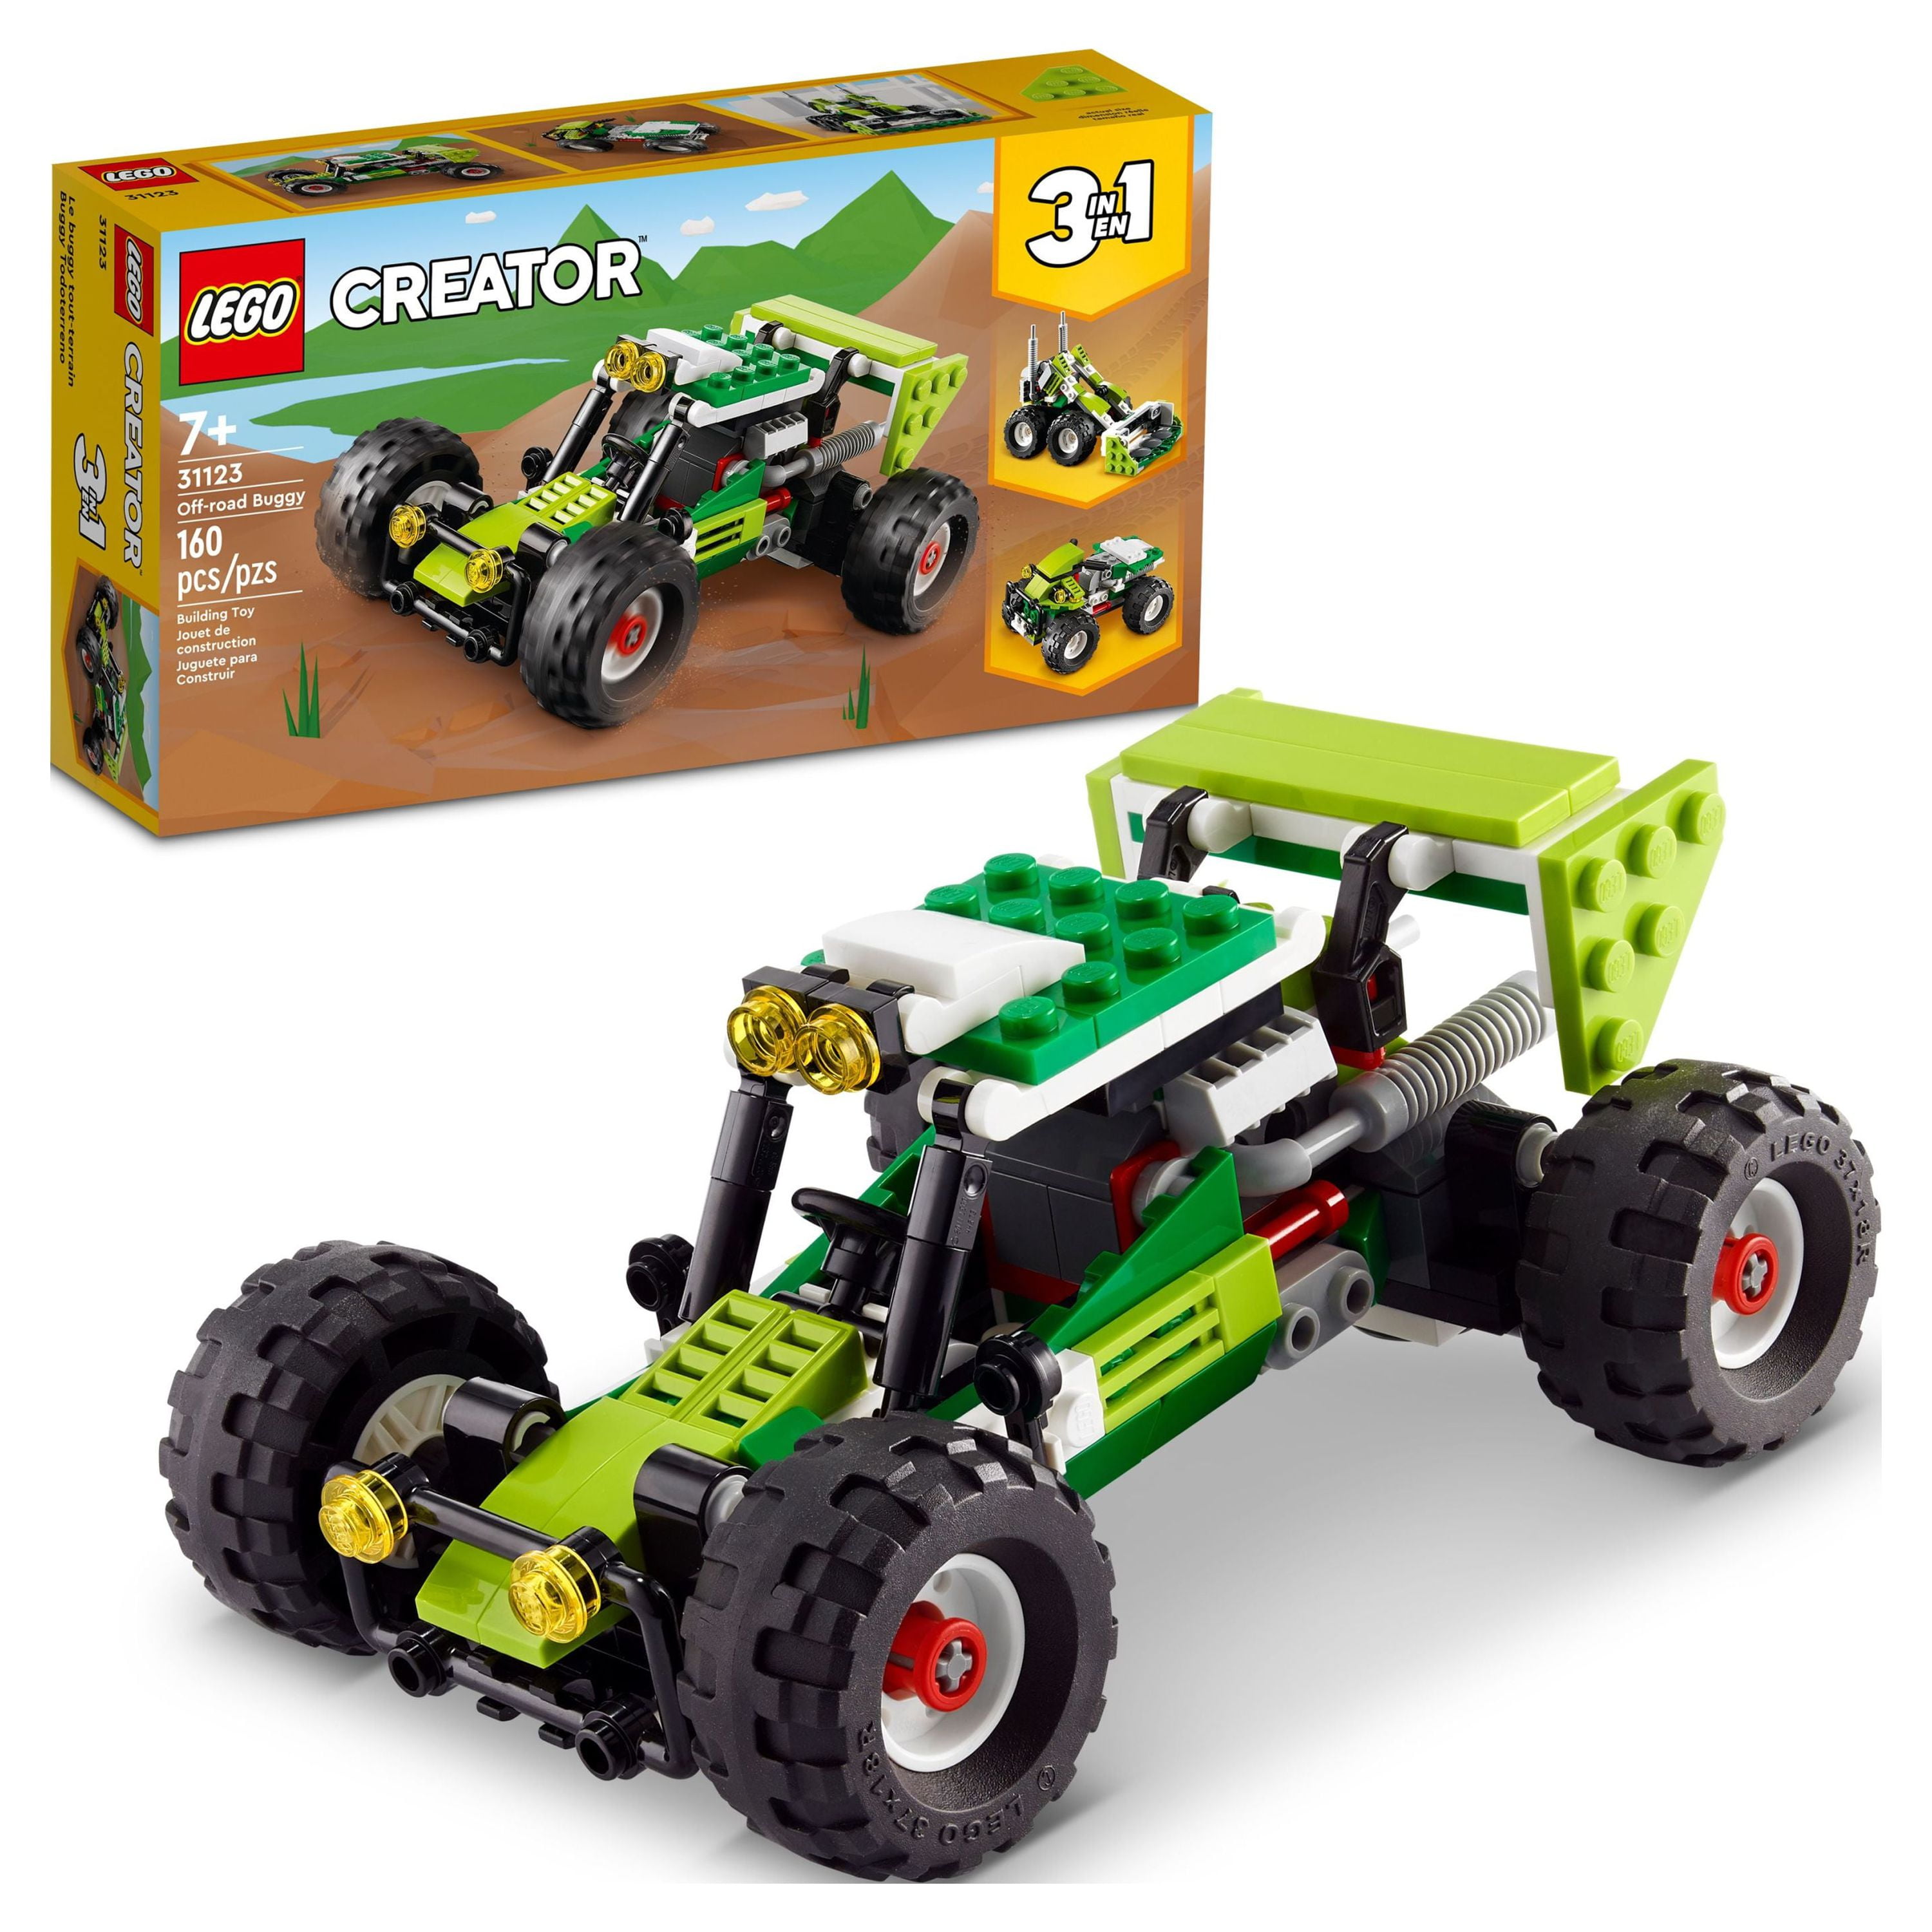 LEGO Creator 3 in 1 Off-road Buggy, Transforms to 3 Different Construction  Vehicles from Skid Loader Digger to ATV Car Toy to Off-Roader, Construction 